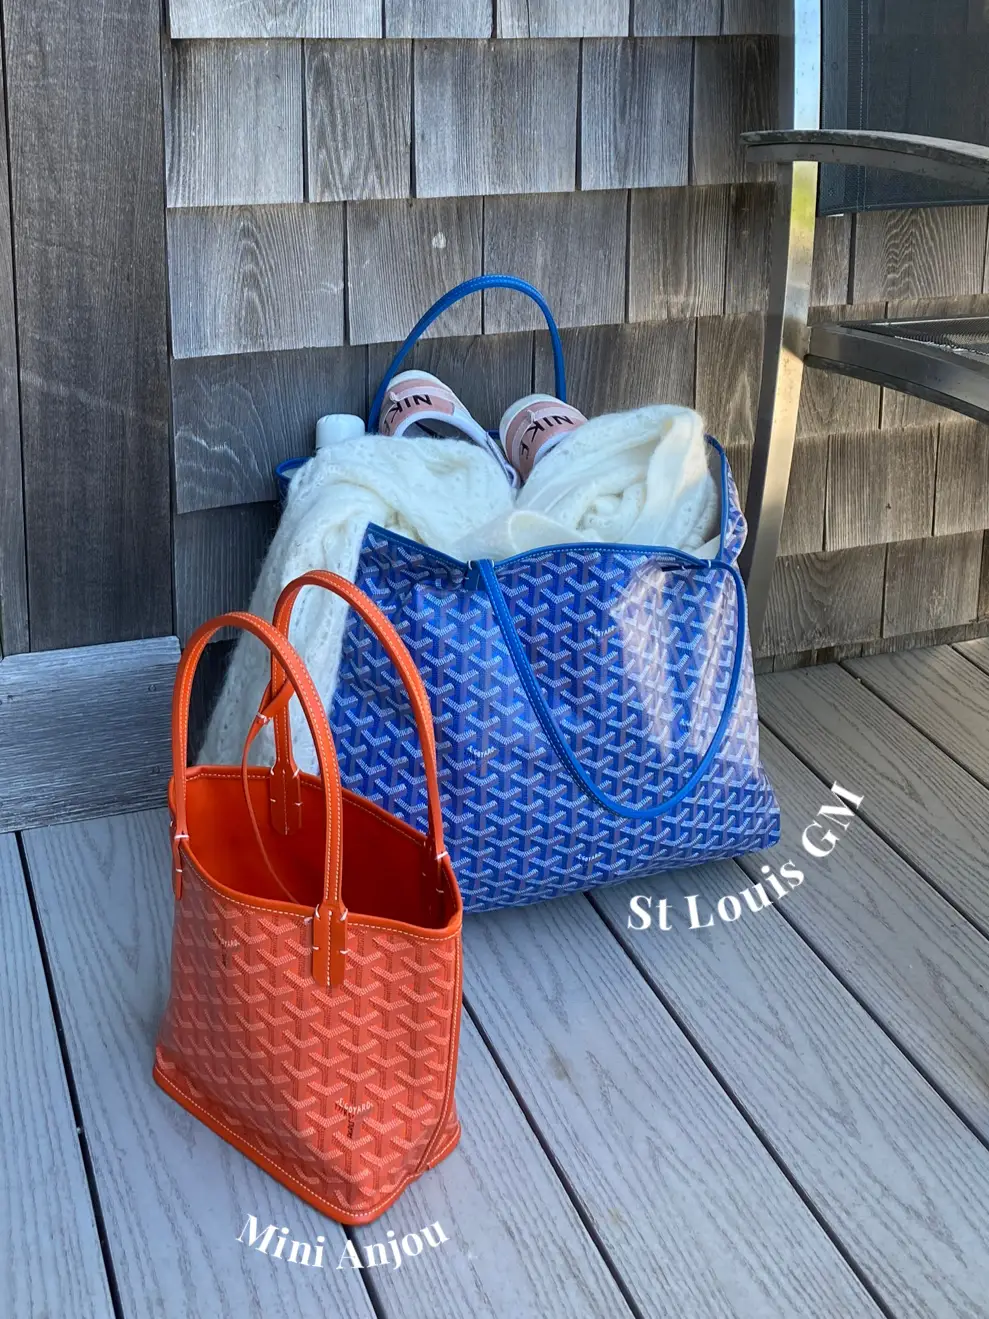 Goyard Artois MM Tote  vs. the St. Louis, current prices, first  impressions 